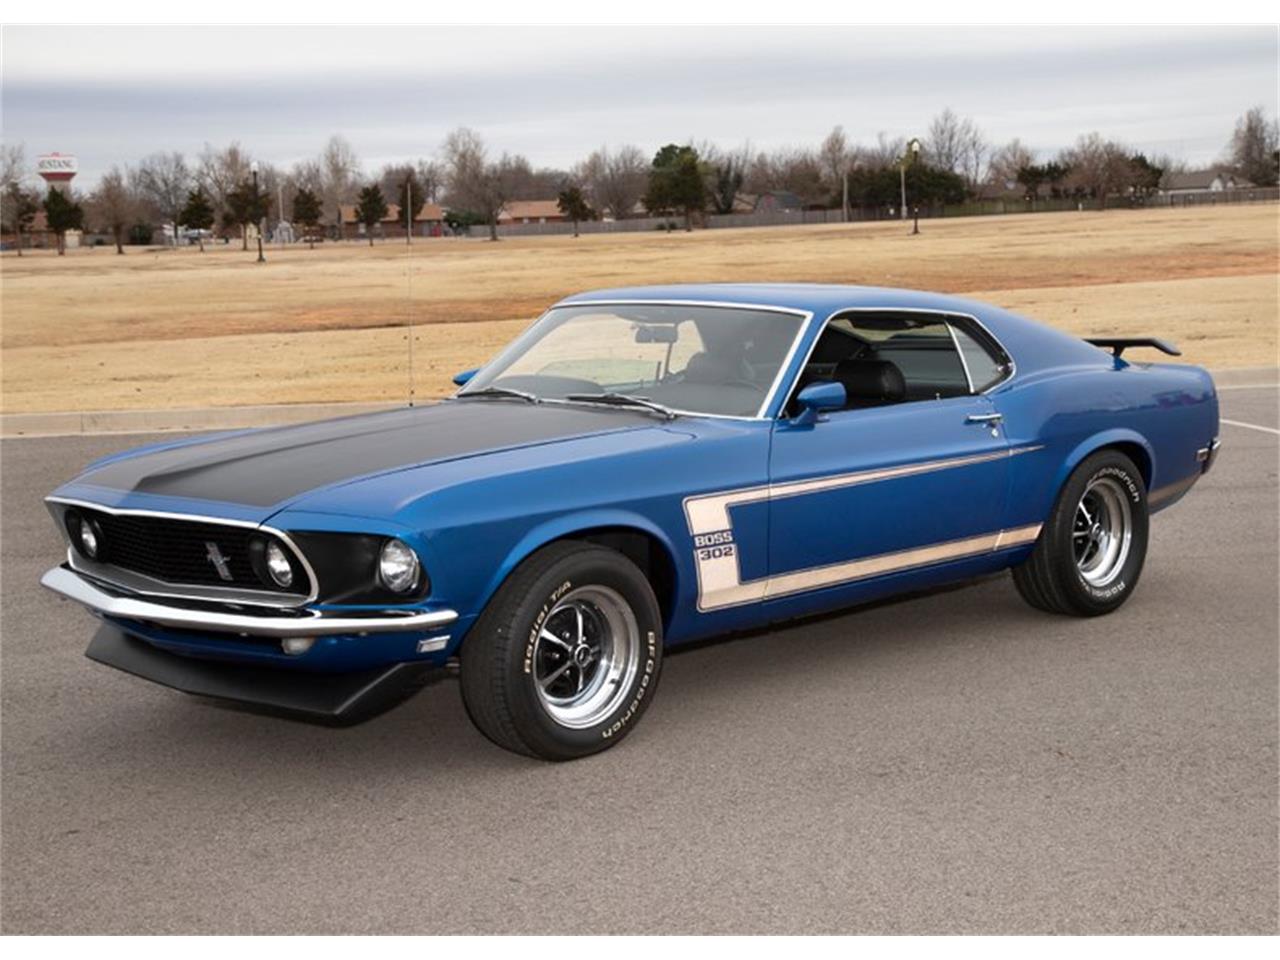 For Sale at Auction: 1969 Ford Mustang in Oklahoma City, Oklahoma.